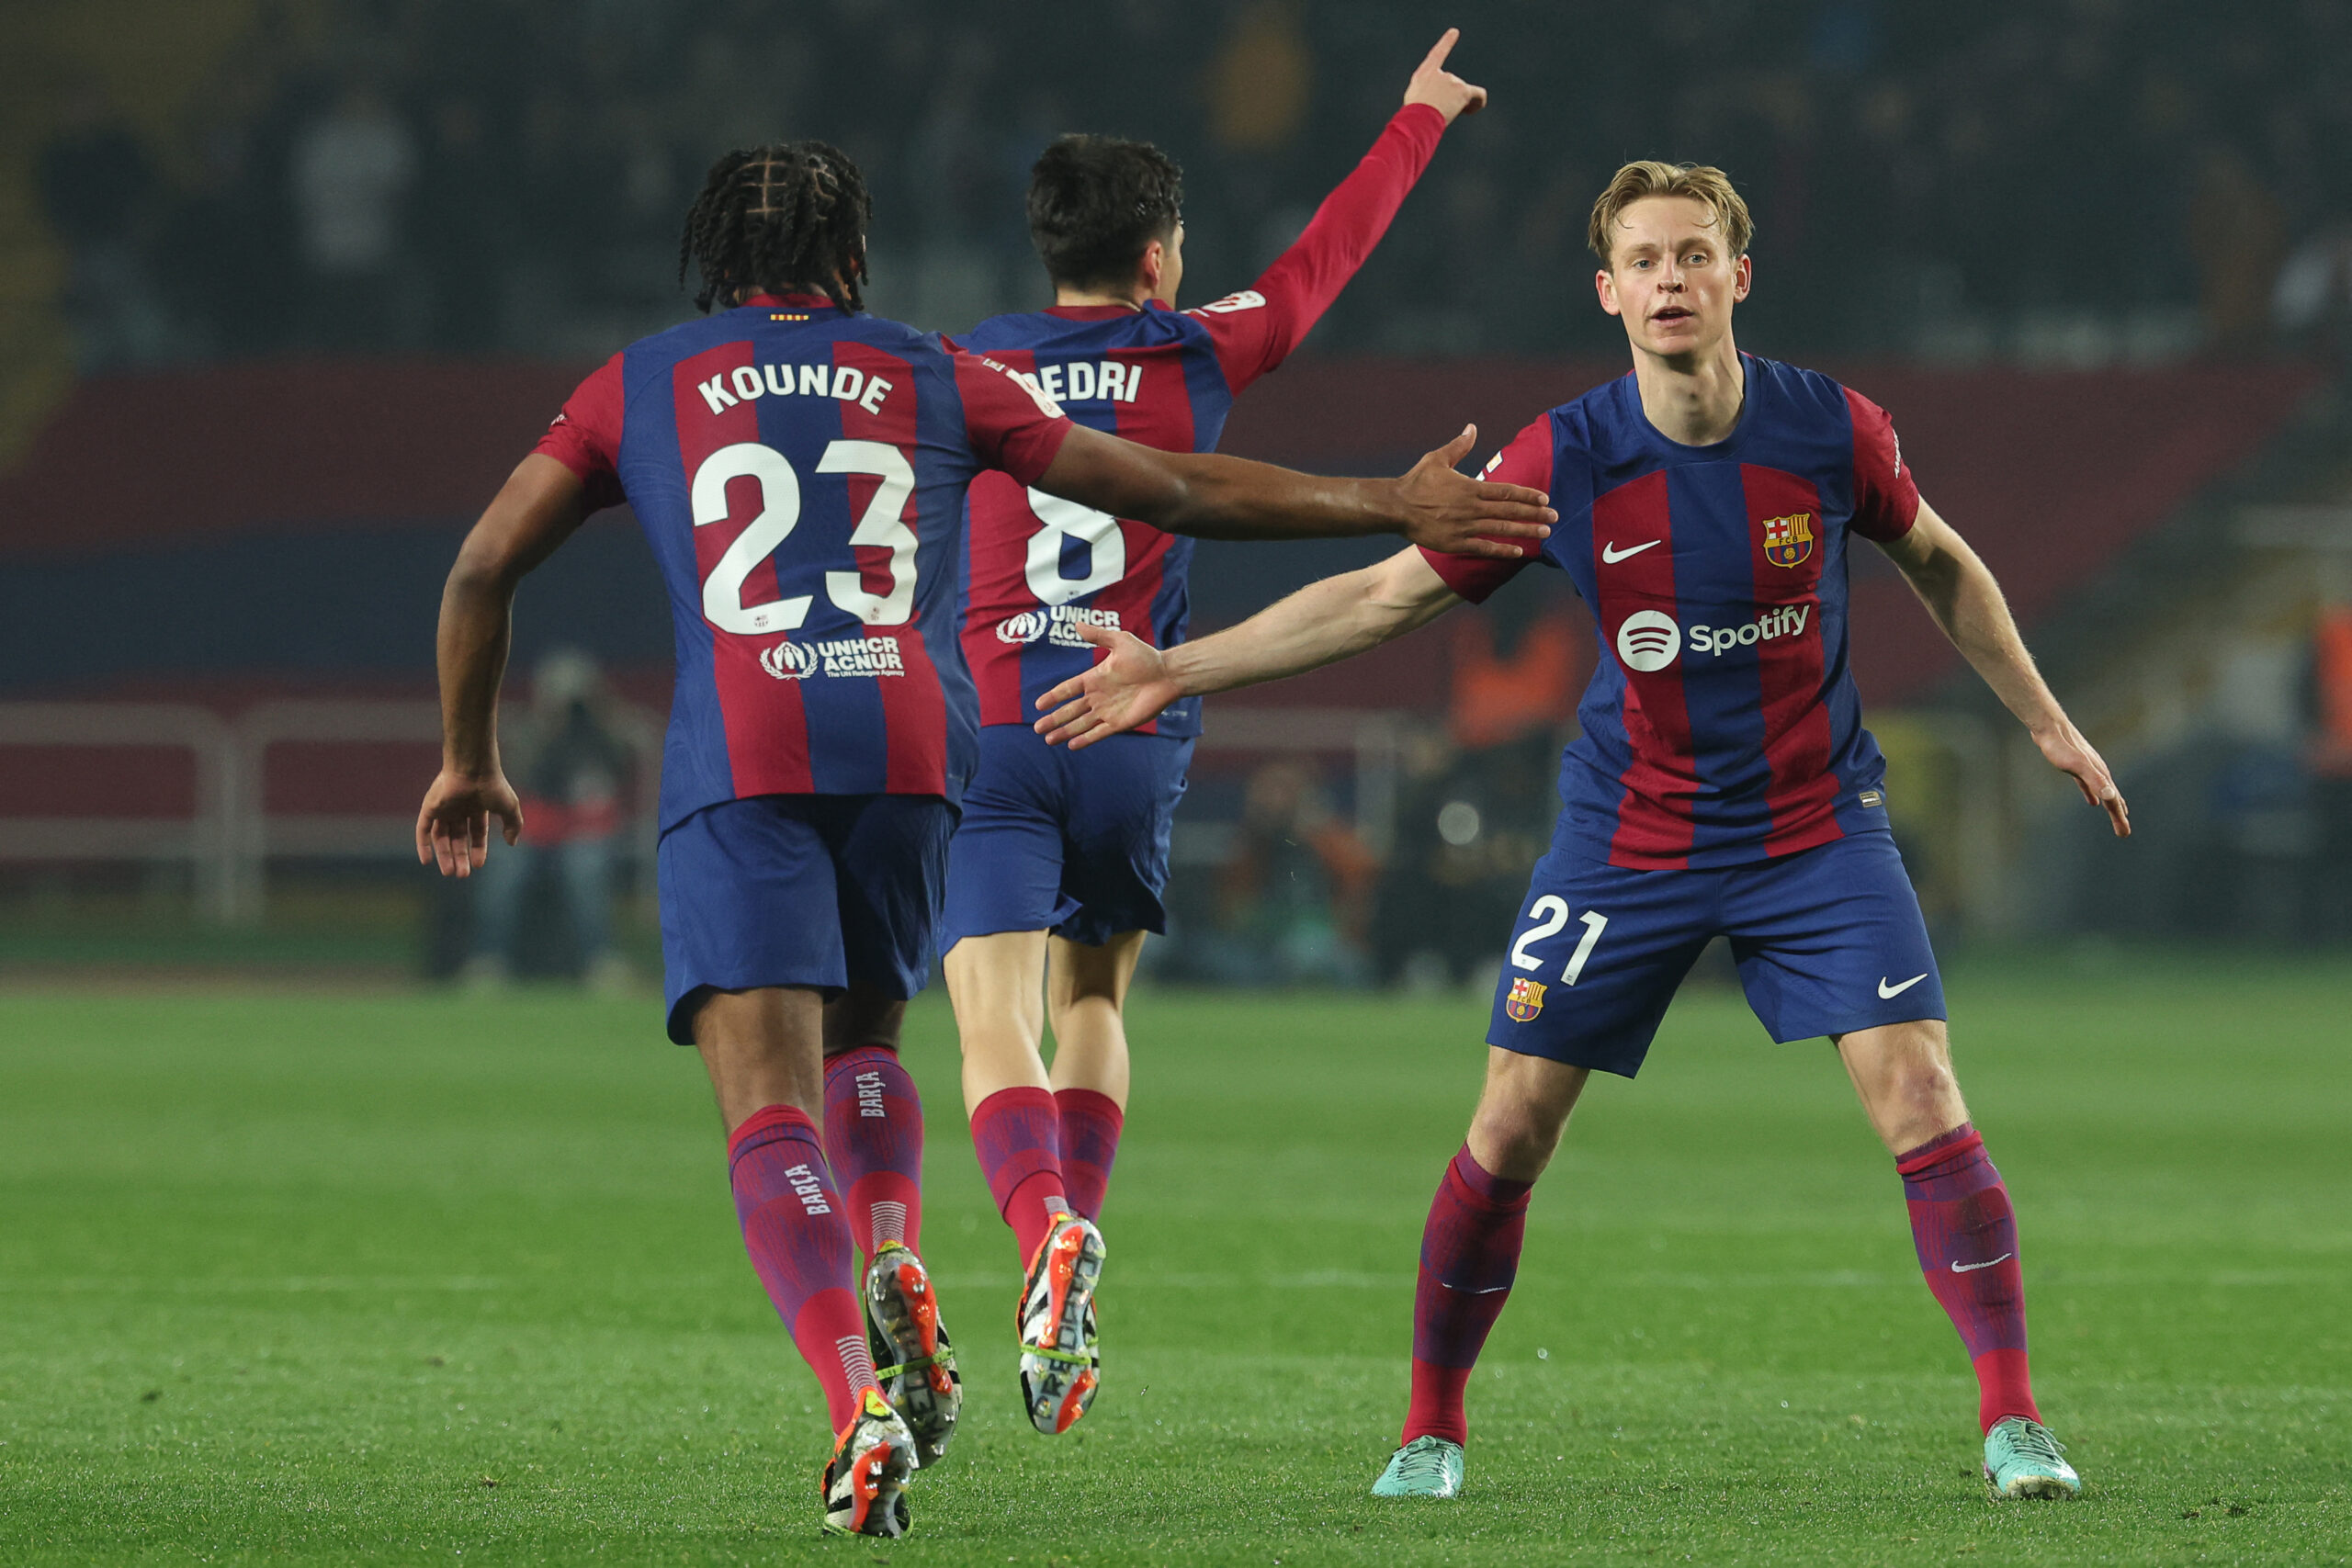 Barcelona's Spanish midfielder #08 Pedri celebrates with Barcelona's French defender #23 Jules Kounde and Barcelona's Dutch midfielder #21 Frenkie de Jong after scoring his team's second goal during the Spanish league football match between FC Barcelona and Villarreal CF at the Estadi Olimpic Lluis Companys in Barcelona on January 27, 2024.